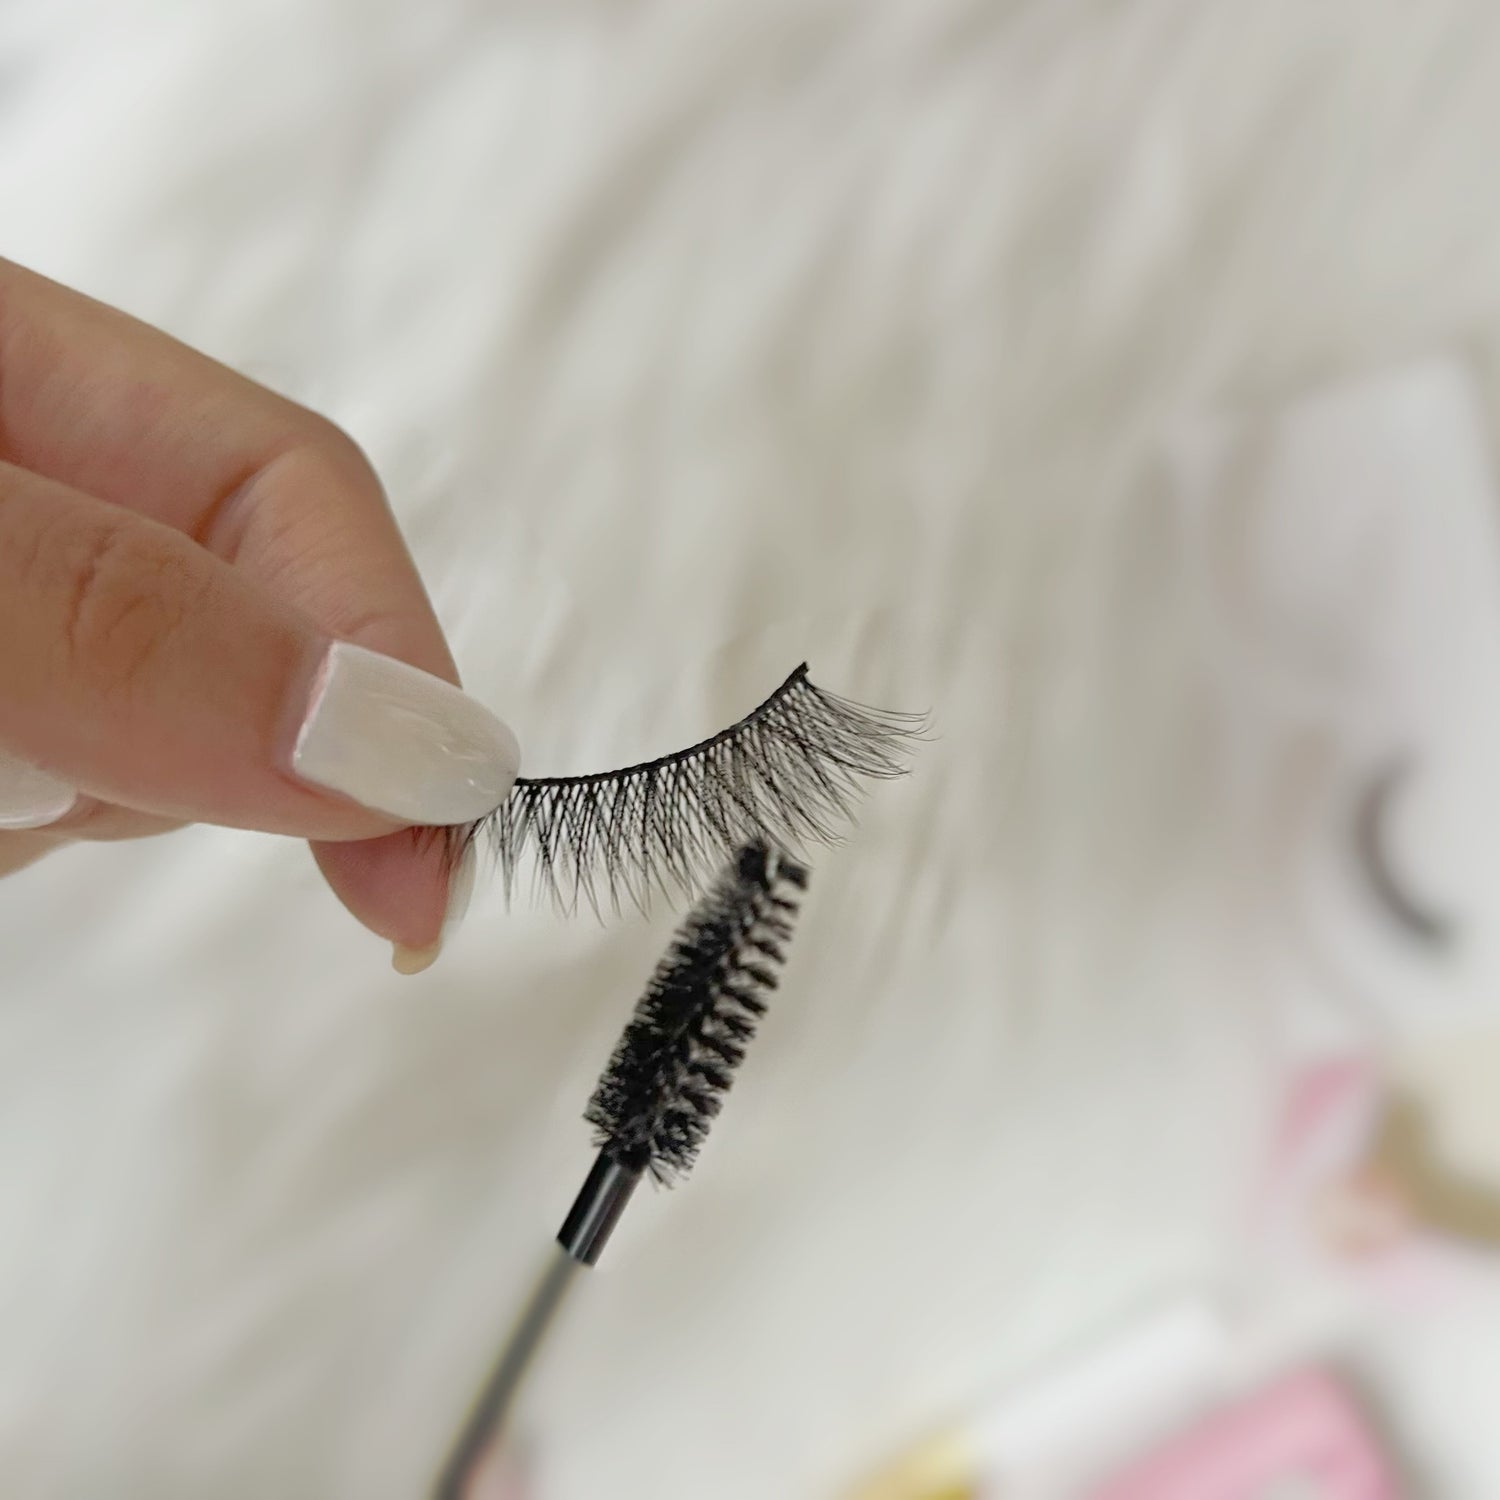 How to clean your false lashes?